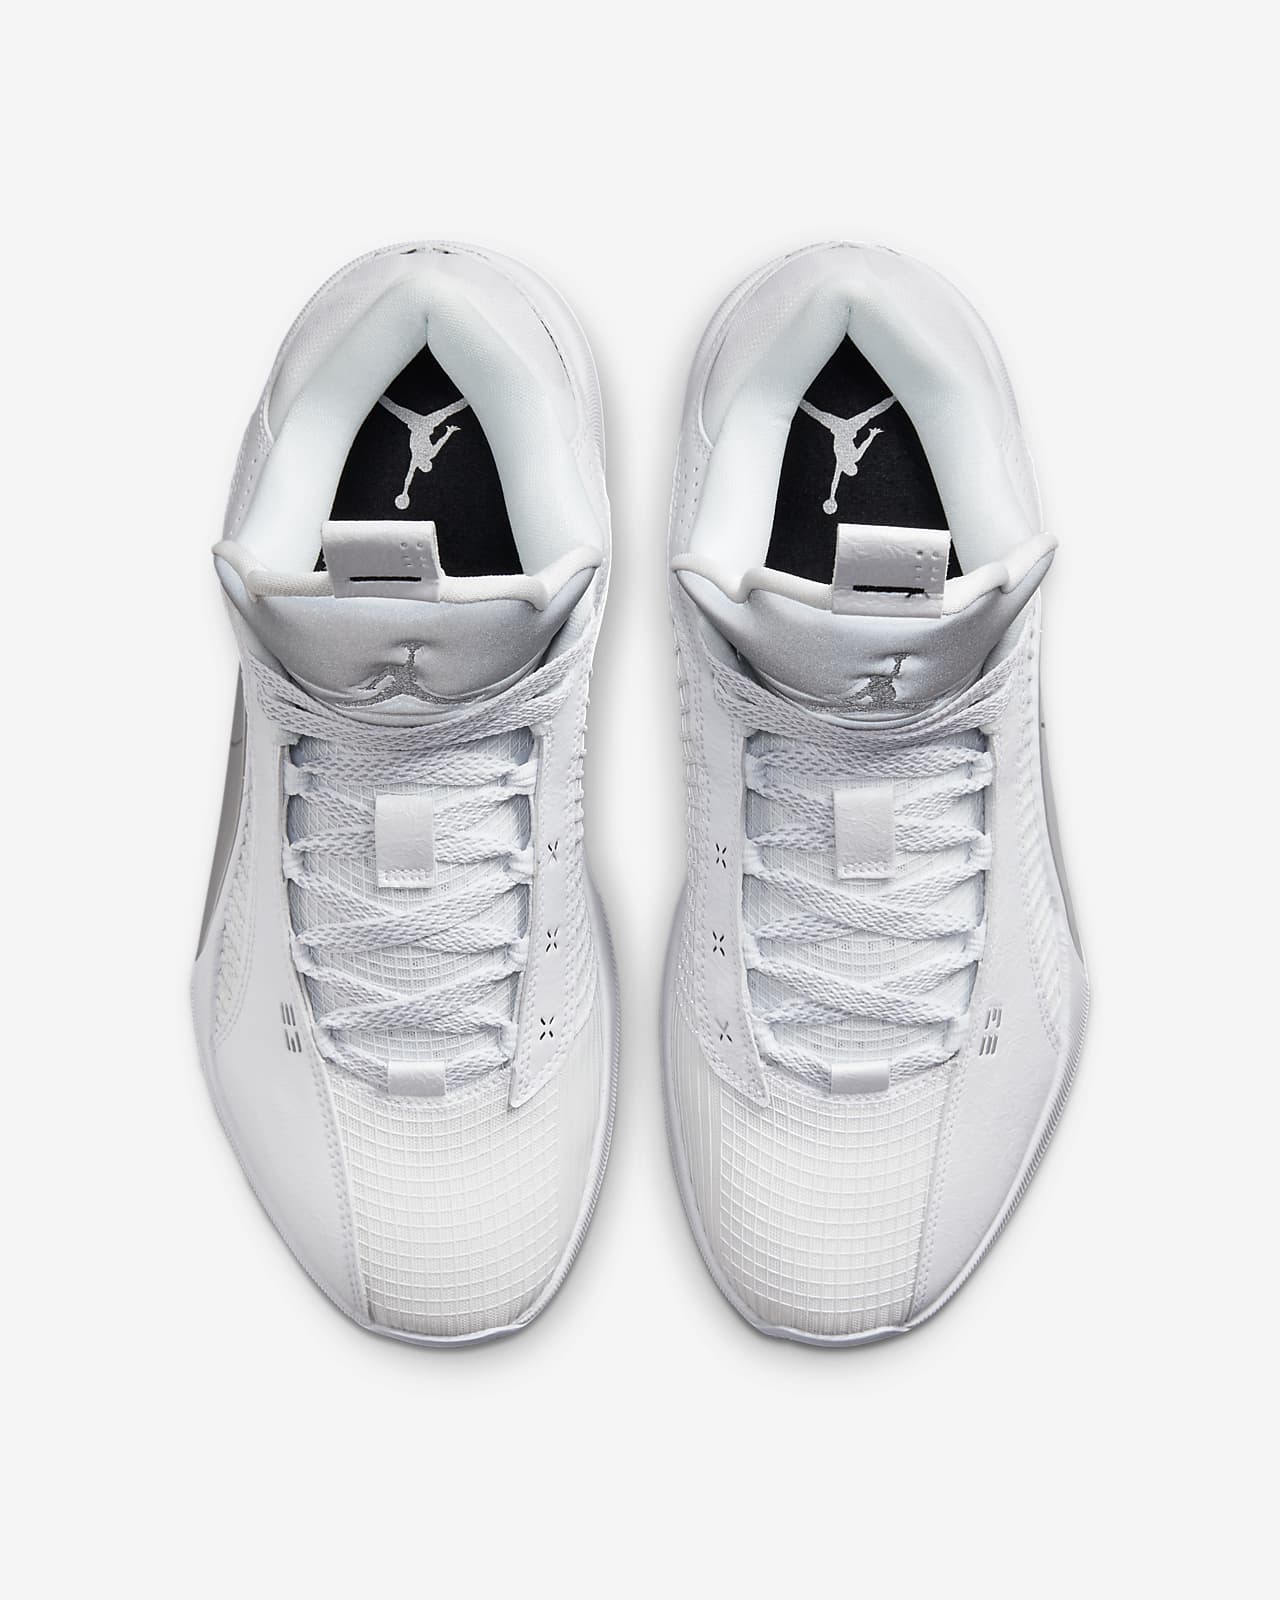 white low top nike basketball shoes